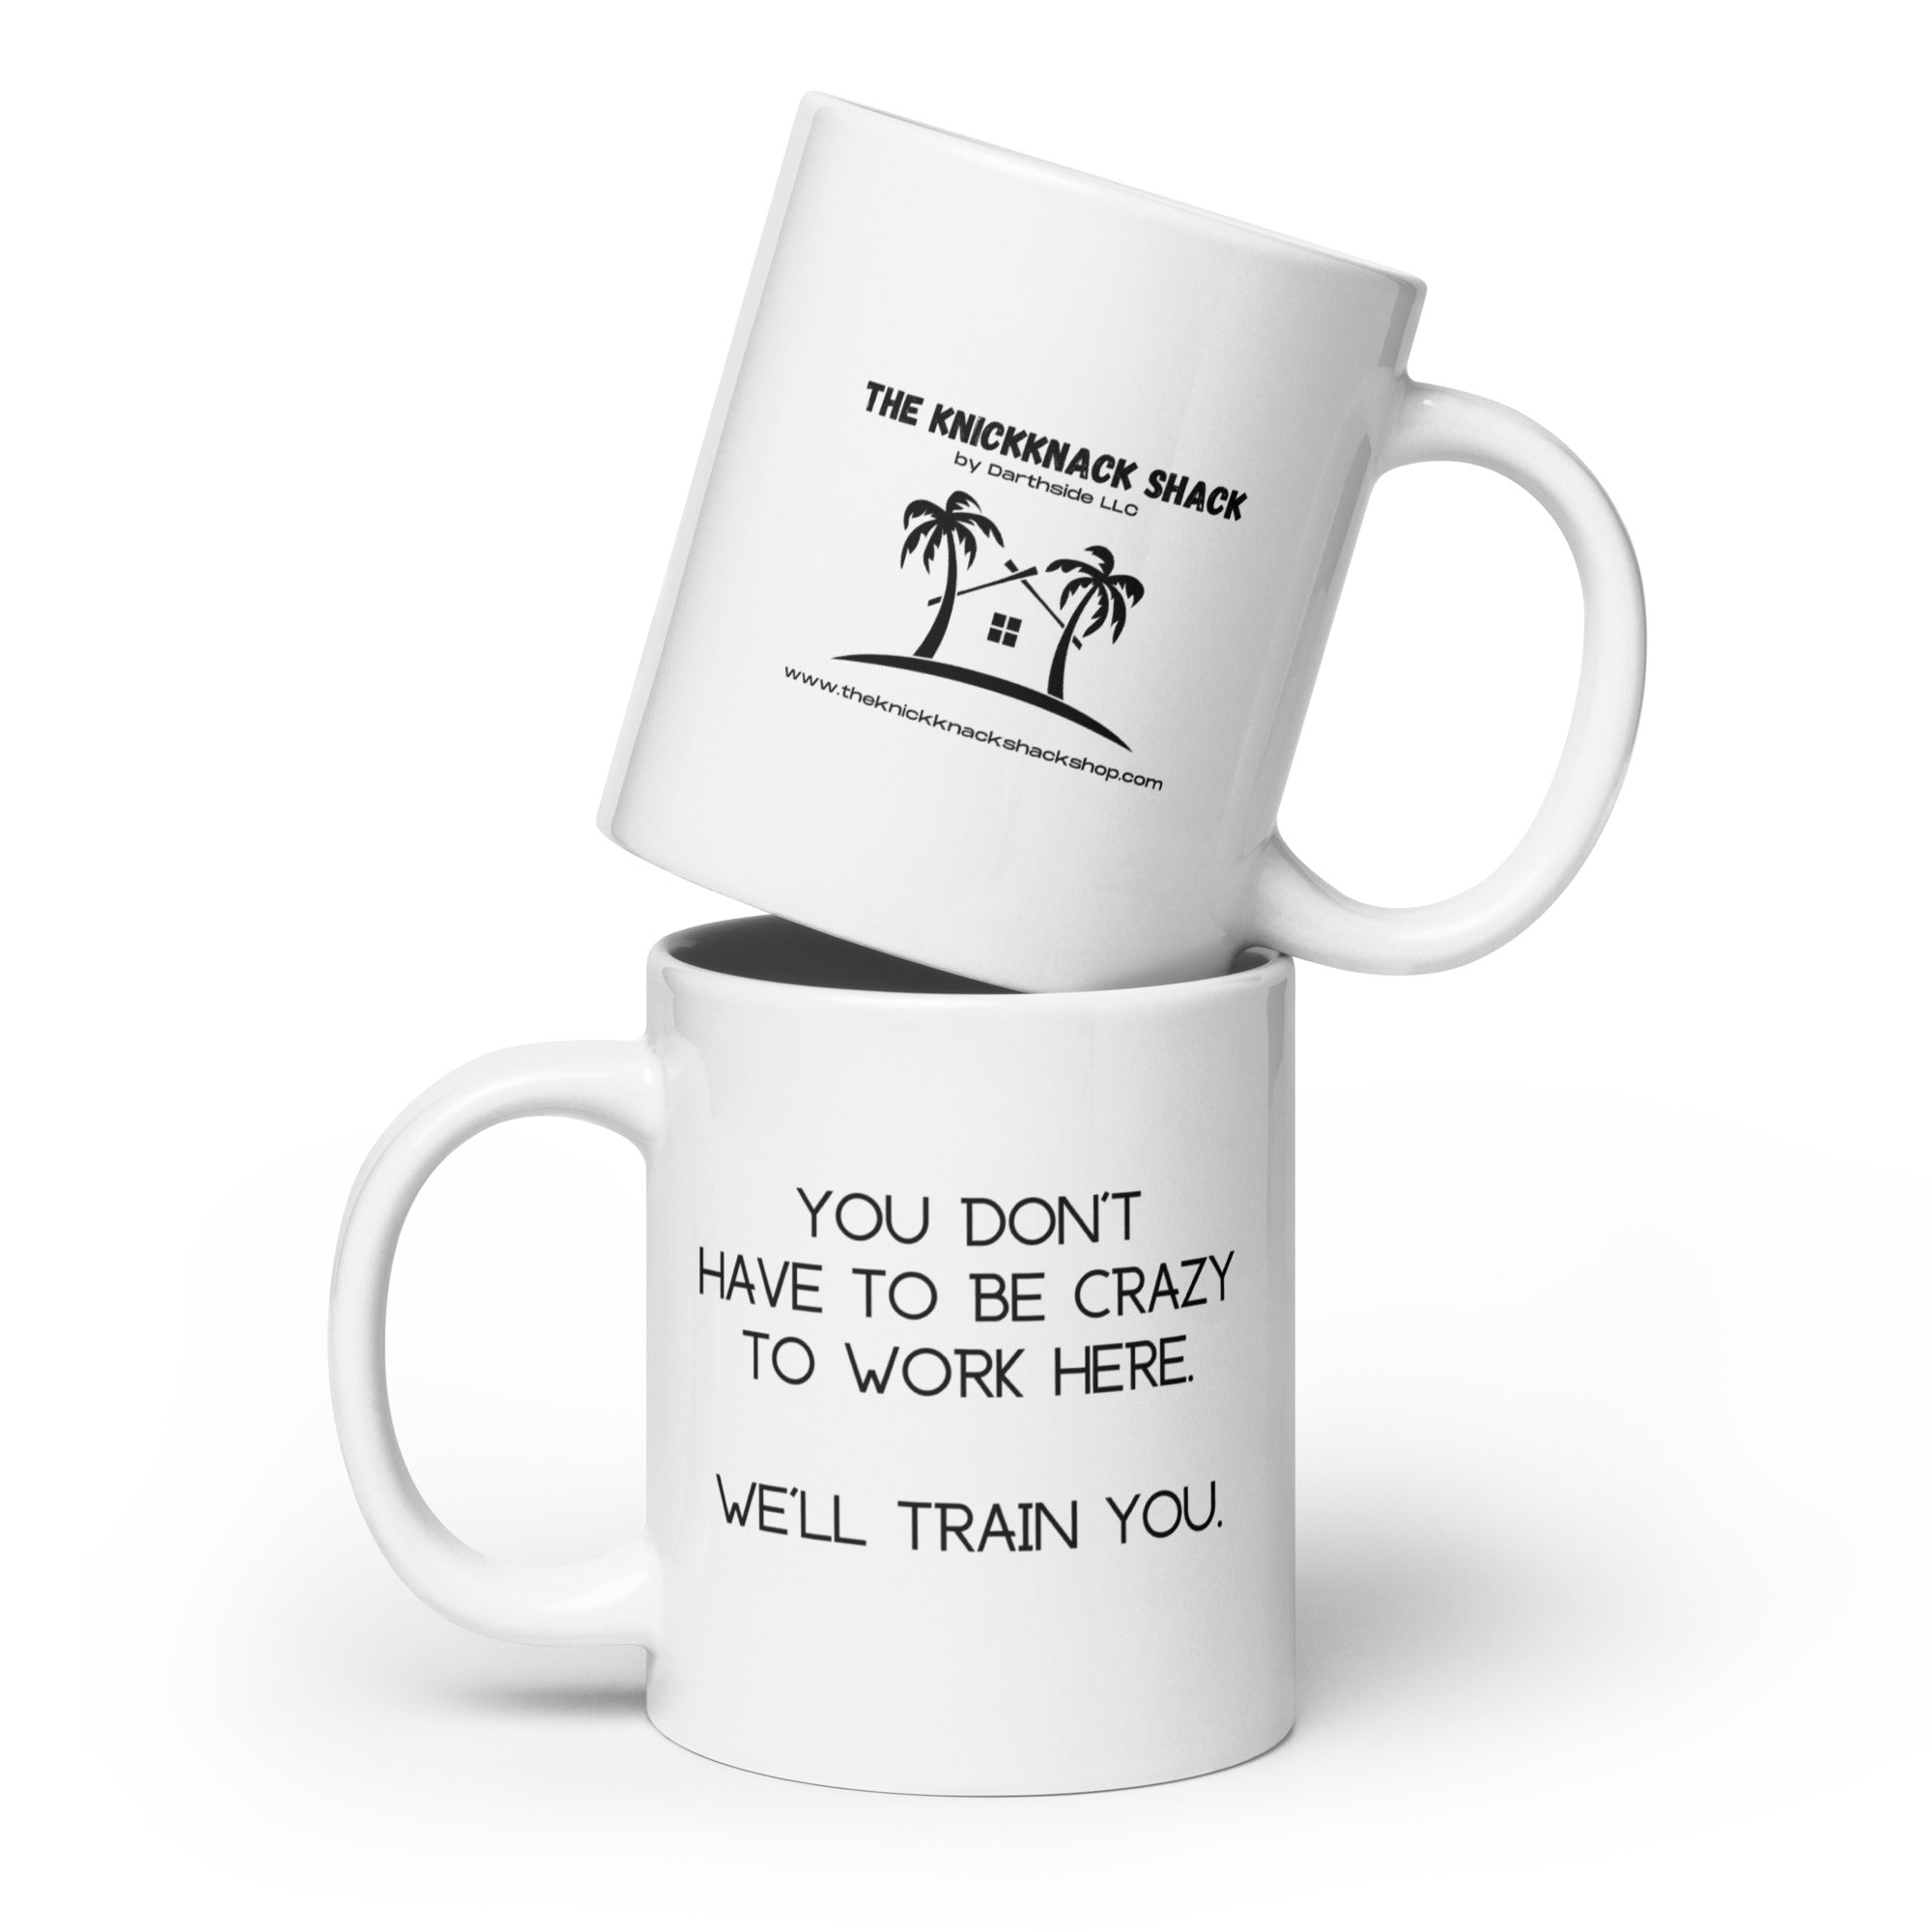 White Glossy Mug - You Don't Have To Be Crazy (R-Handed)